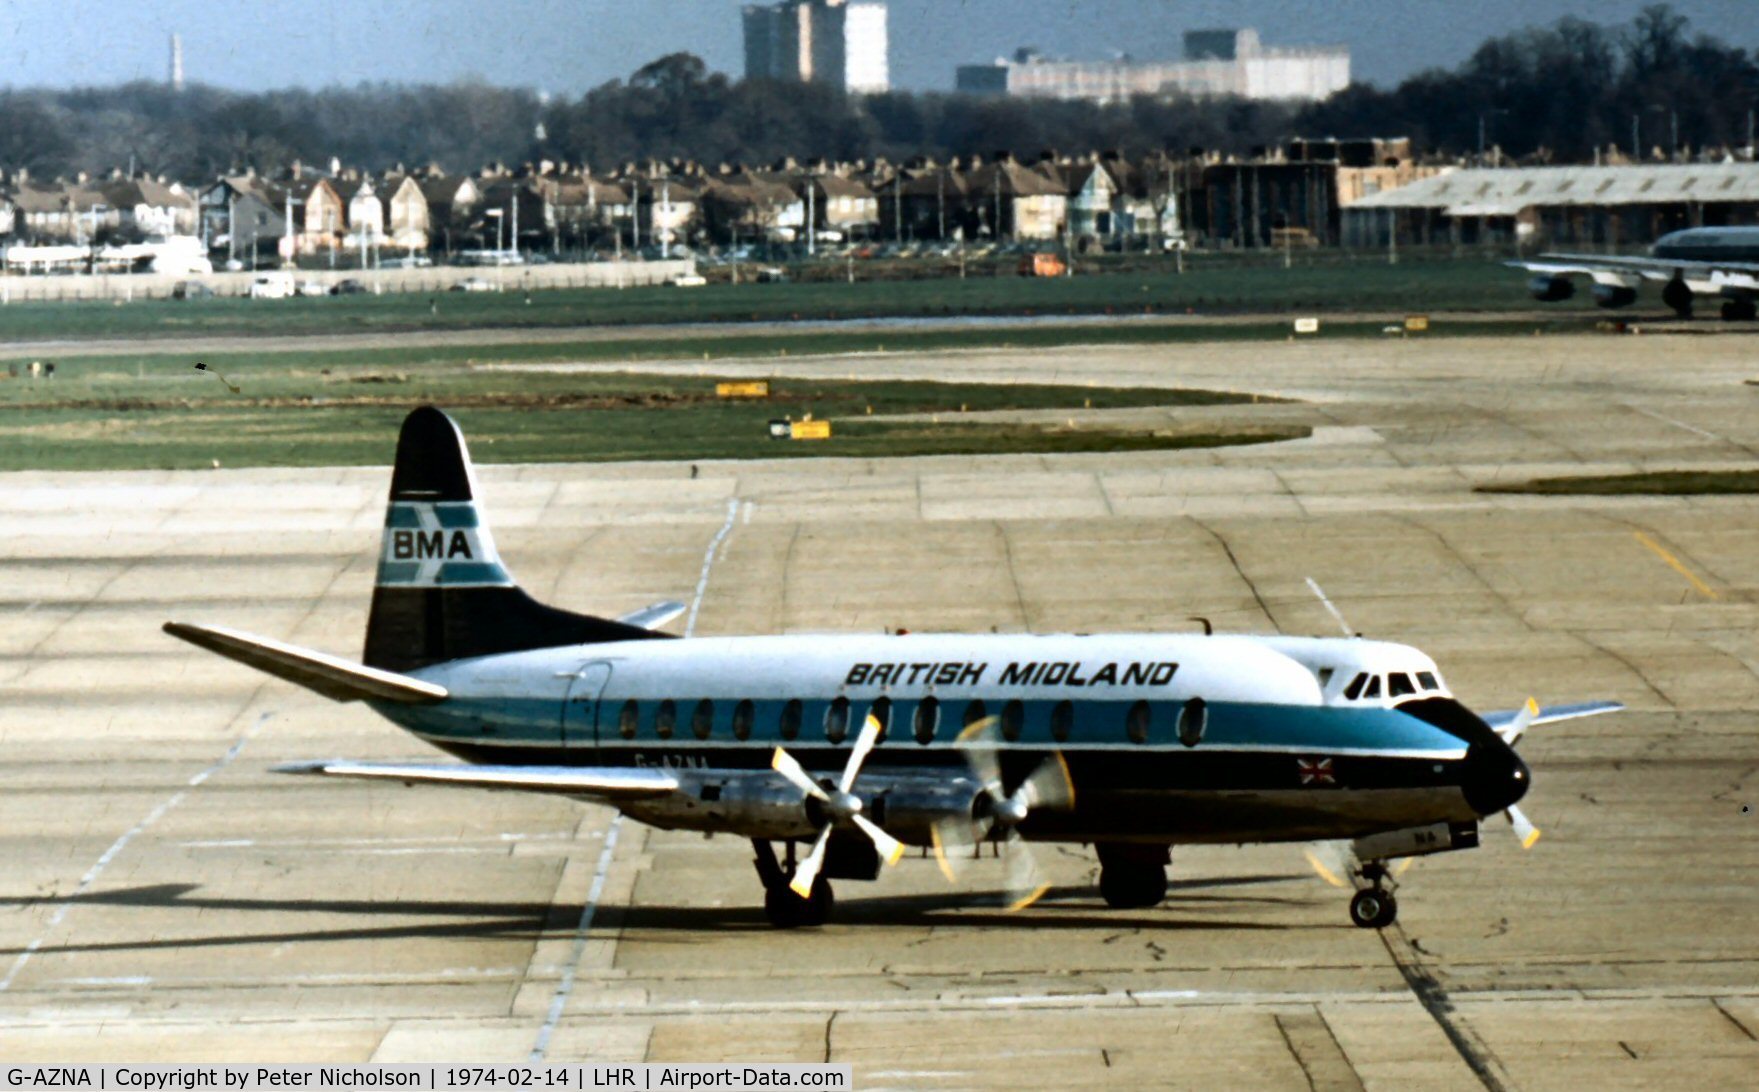 G-AZNA, 1958 Vickers Viscount 813 C/N 350, In service in 1974 with British Midland Airways